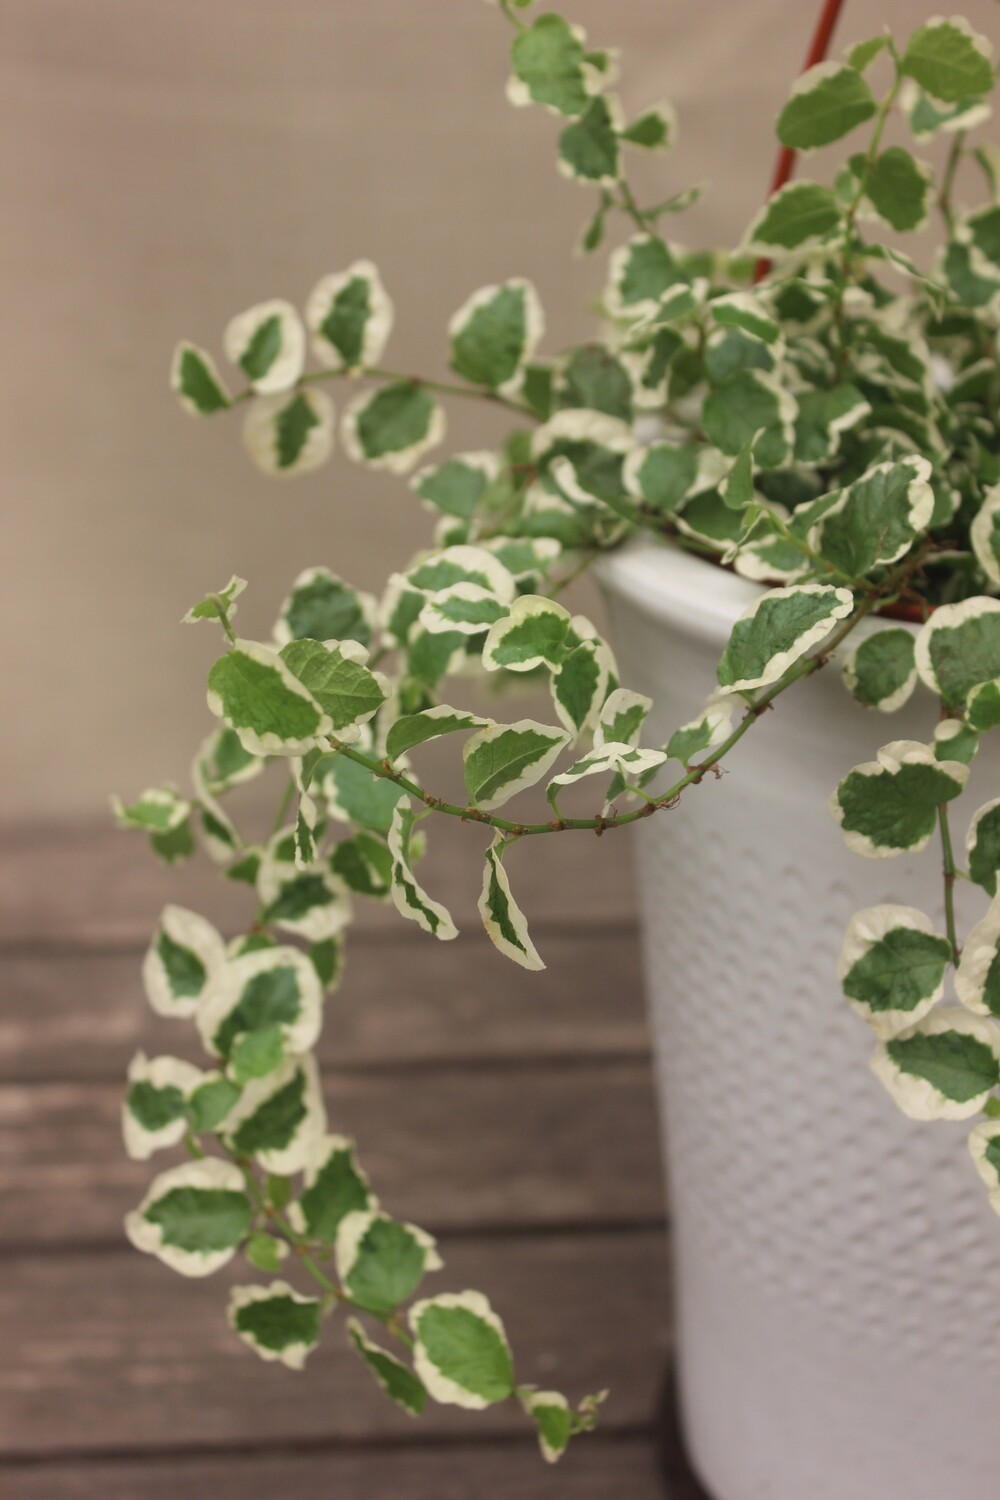 6" Ficus repens (Variegated Creeping Fig)